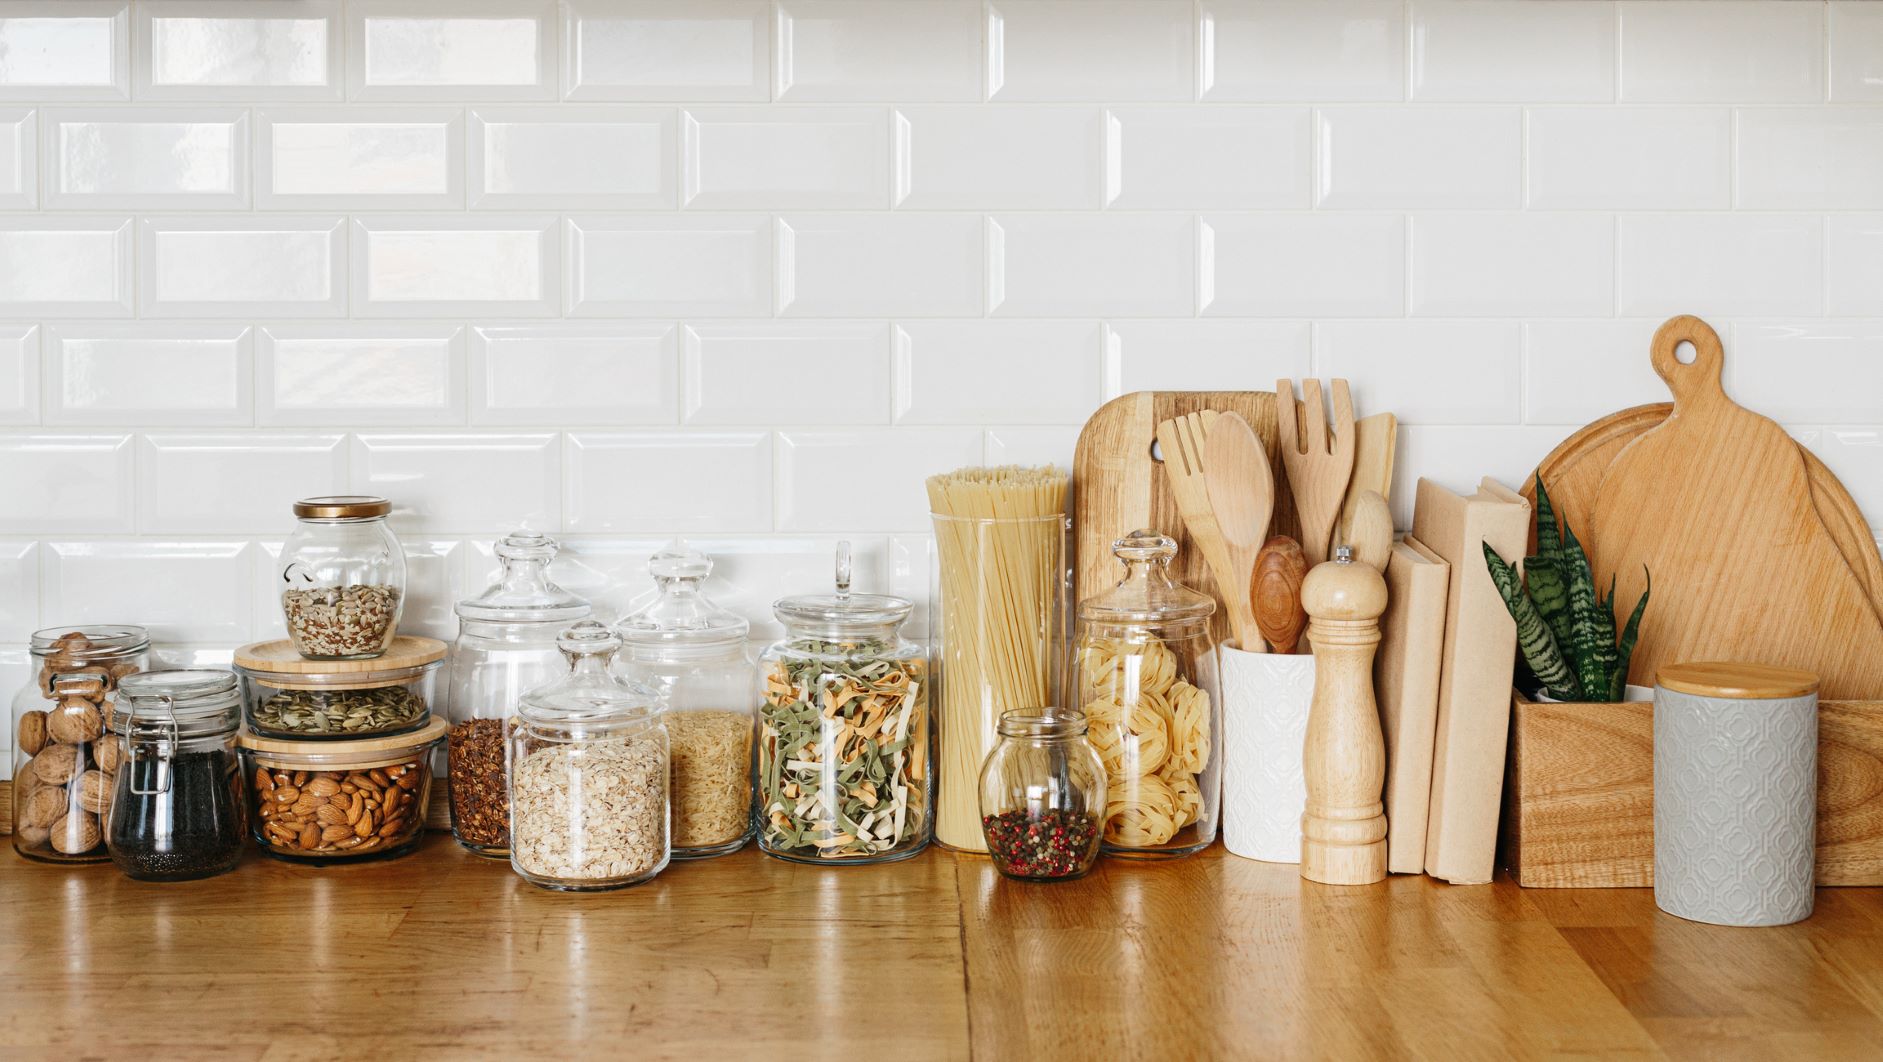 7 tips to kit out your kitchen - The Origin Blog